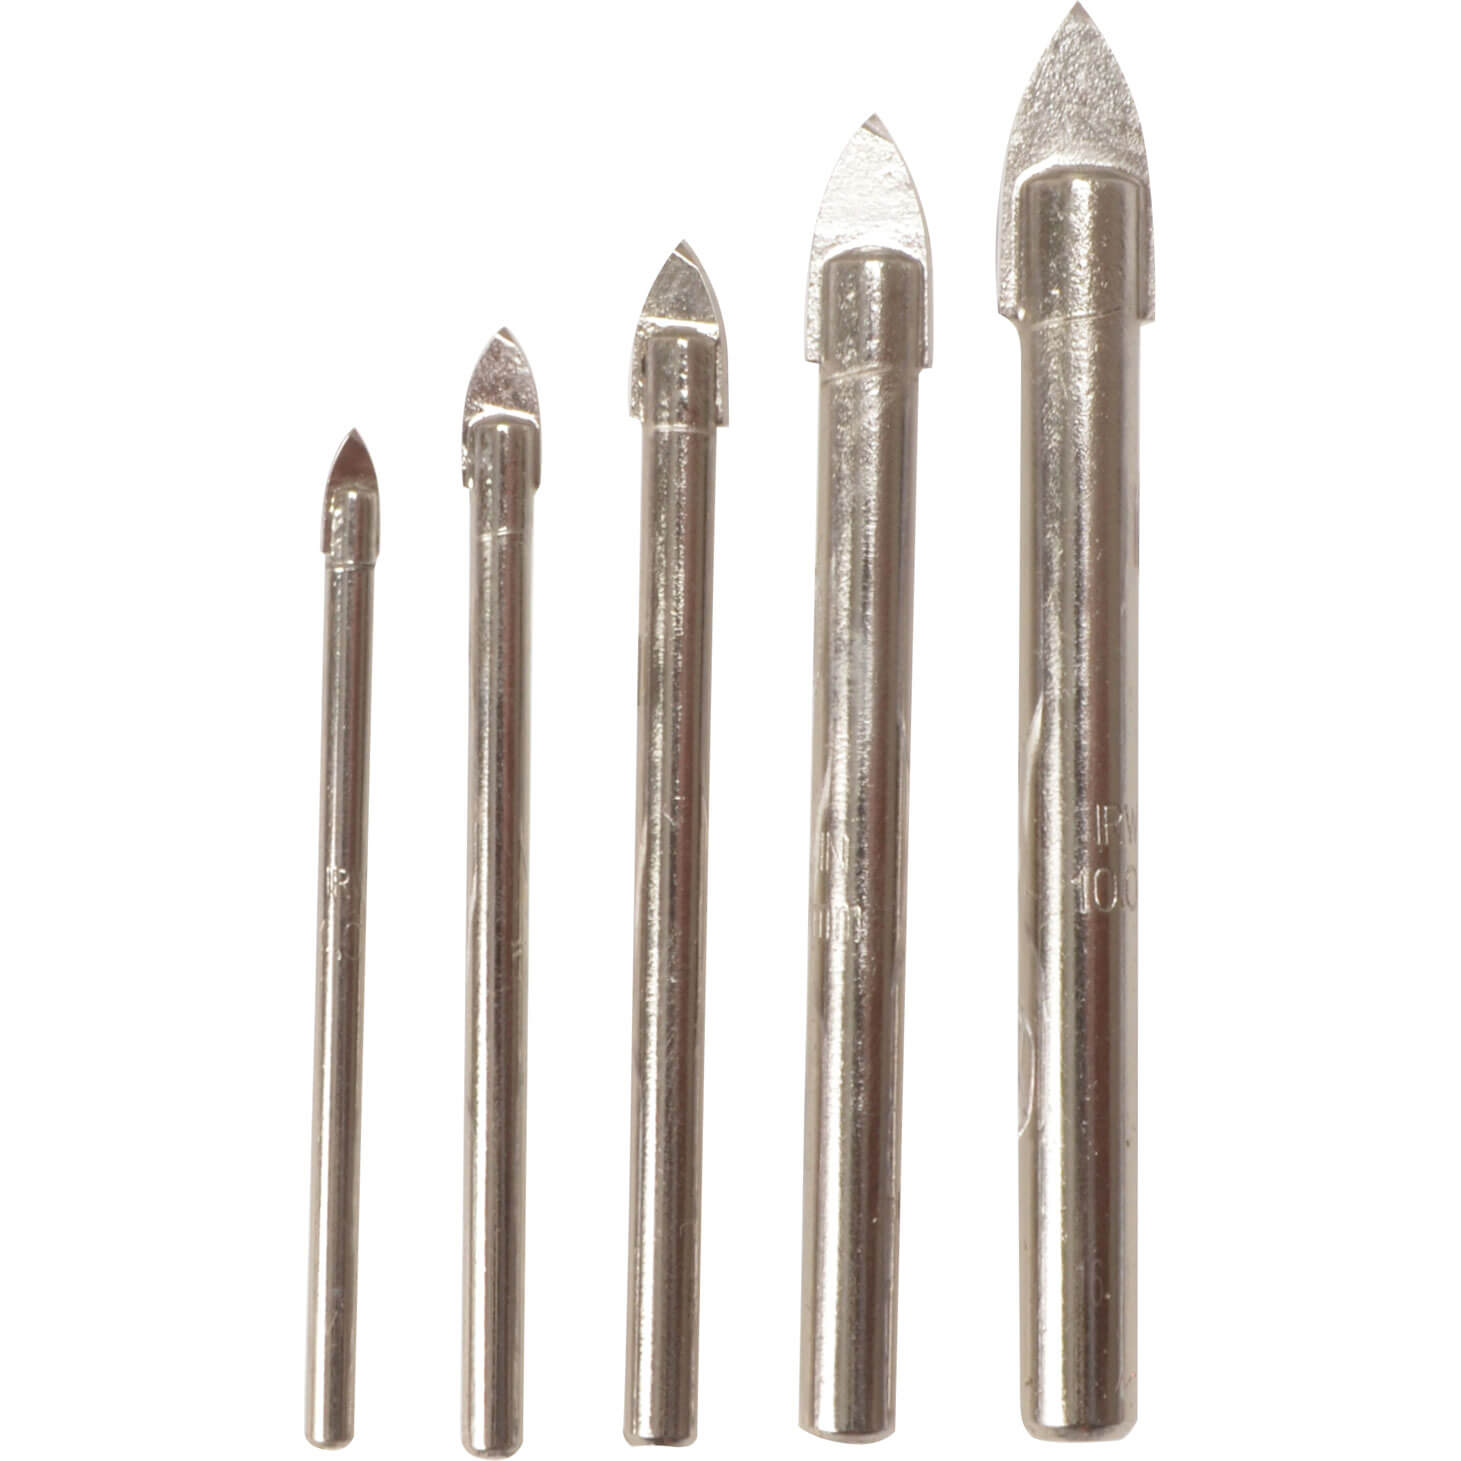 Photo of Irwin 5 Piece Glass And Tile Drill Bit Set